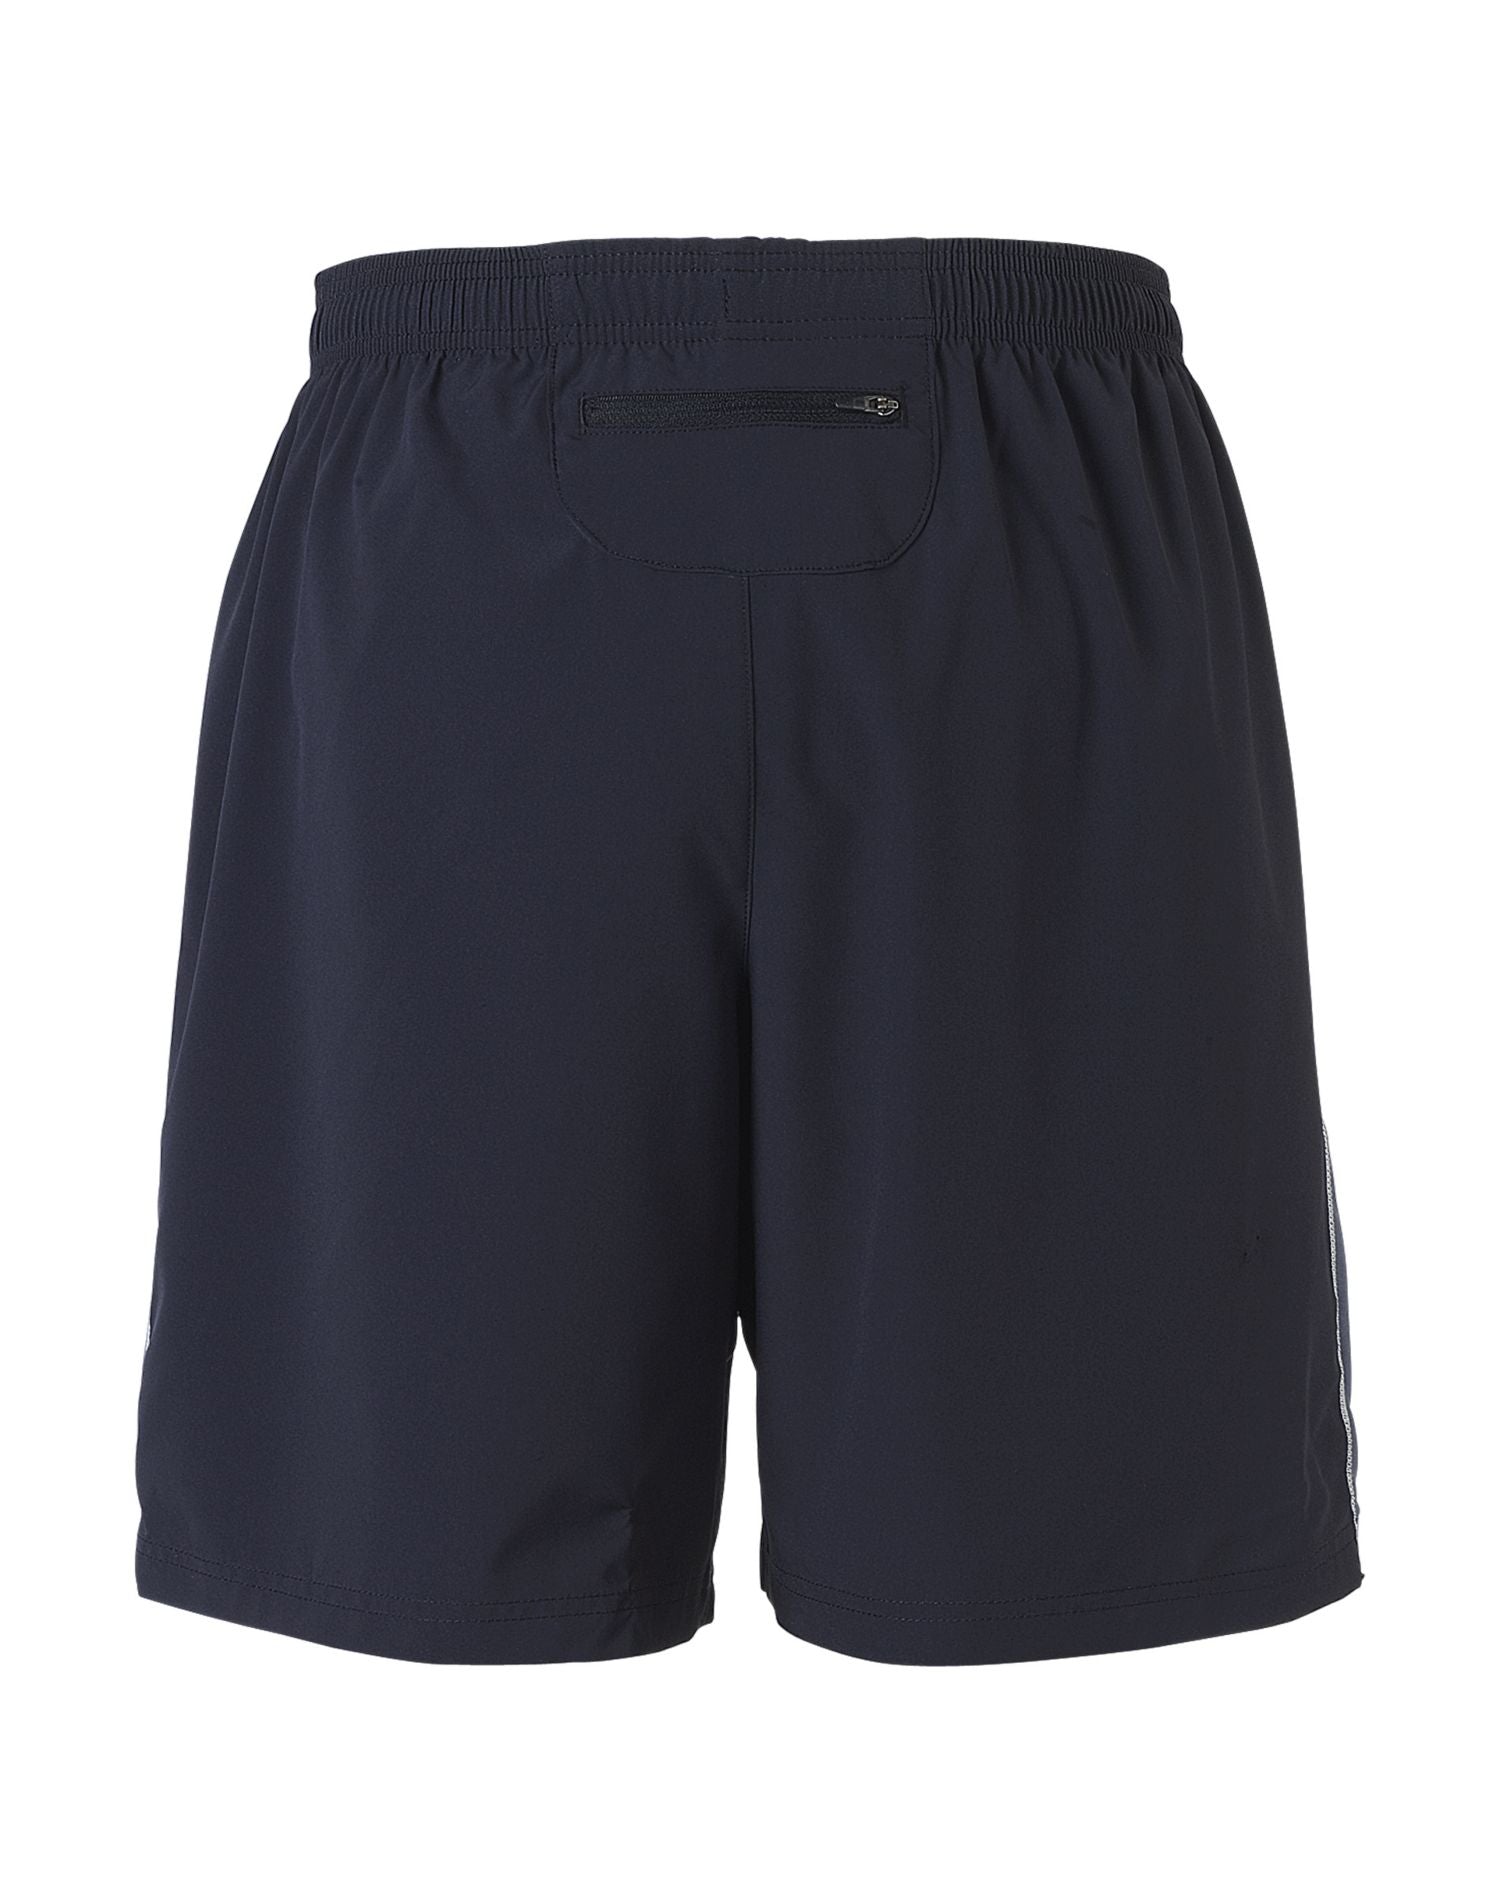 84526 - Champion Double Dry+ Intensity Woven Men's Athletic Shorts with ...